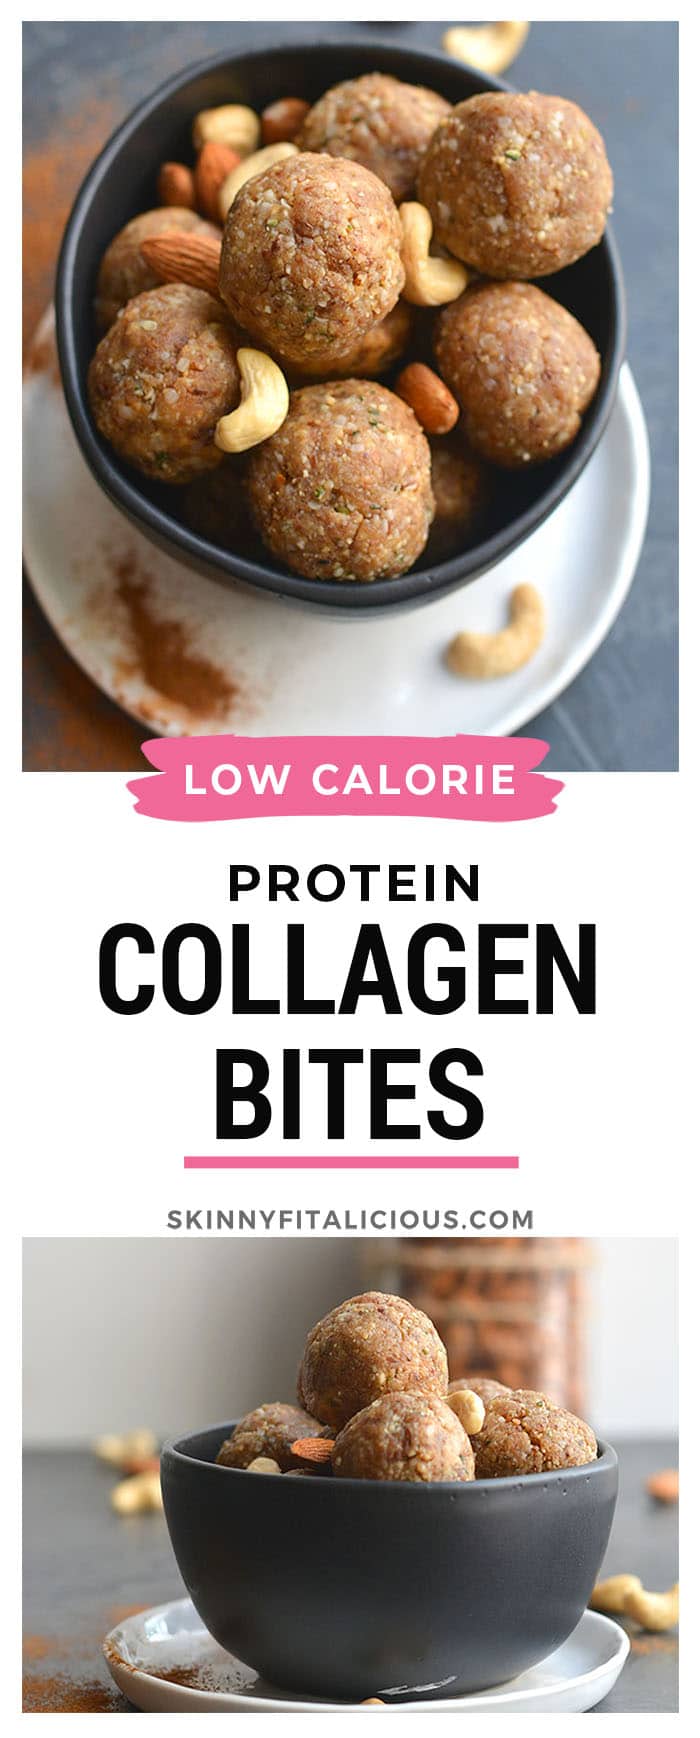 Nutty Collagen Protein Bites! These no bake energy bites are loaded with healthy fat and protein! Chewy, slightly sweet and customizable to any nuts you like, these make a great breakfast or snack. Paleo + Low Carb + Gluten Free + Low Calorie